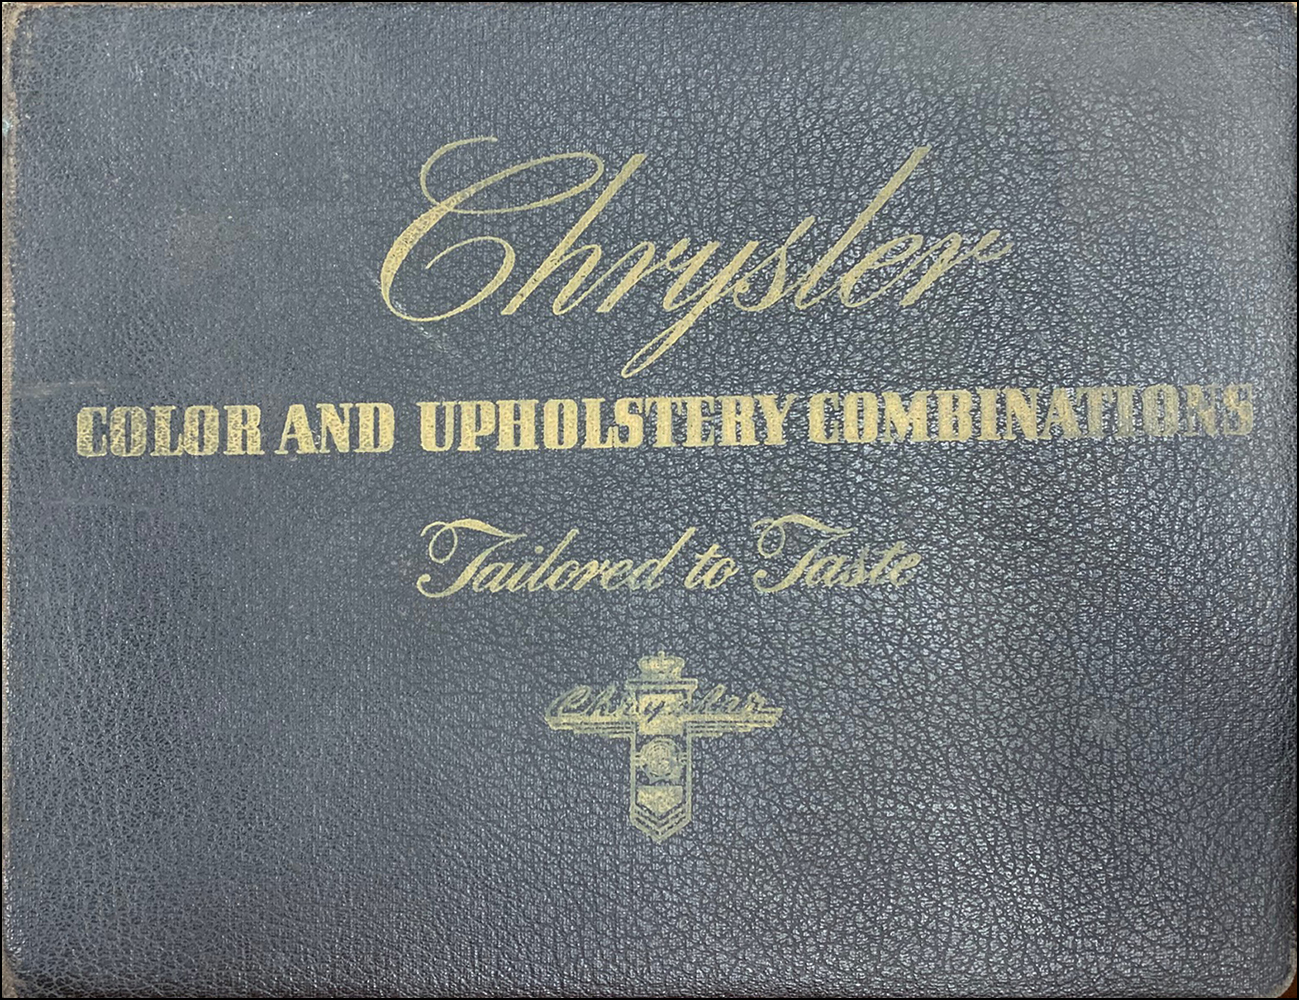 1946-1947 Chrysler Color and Upholstery Album